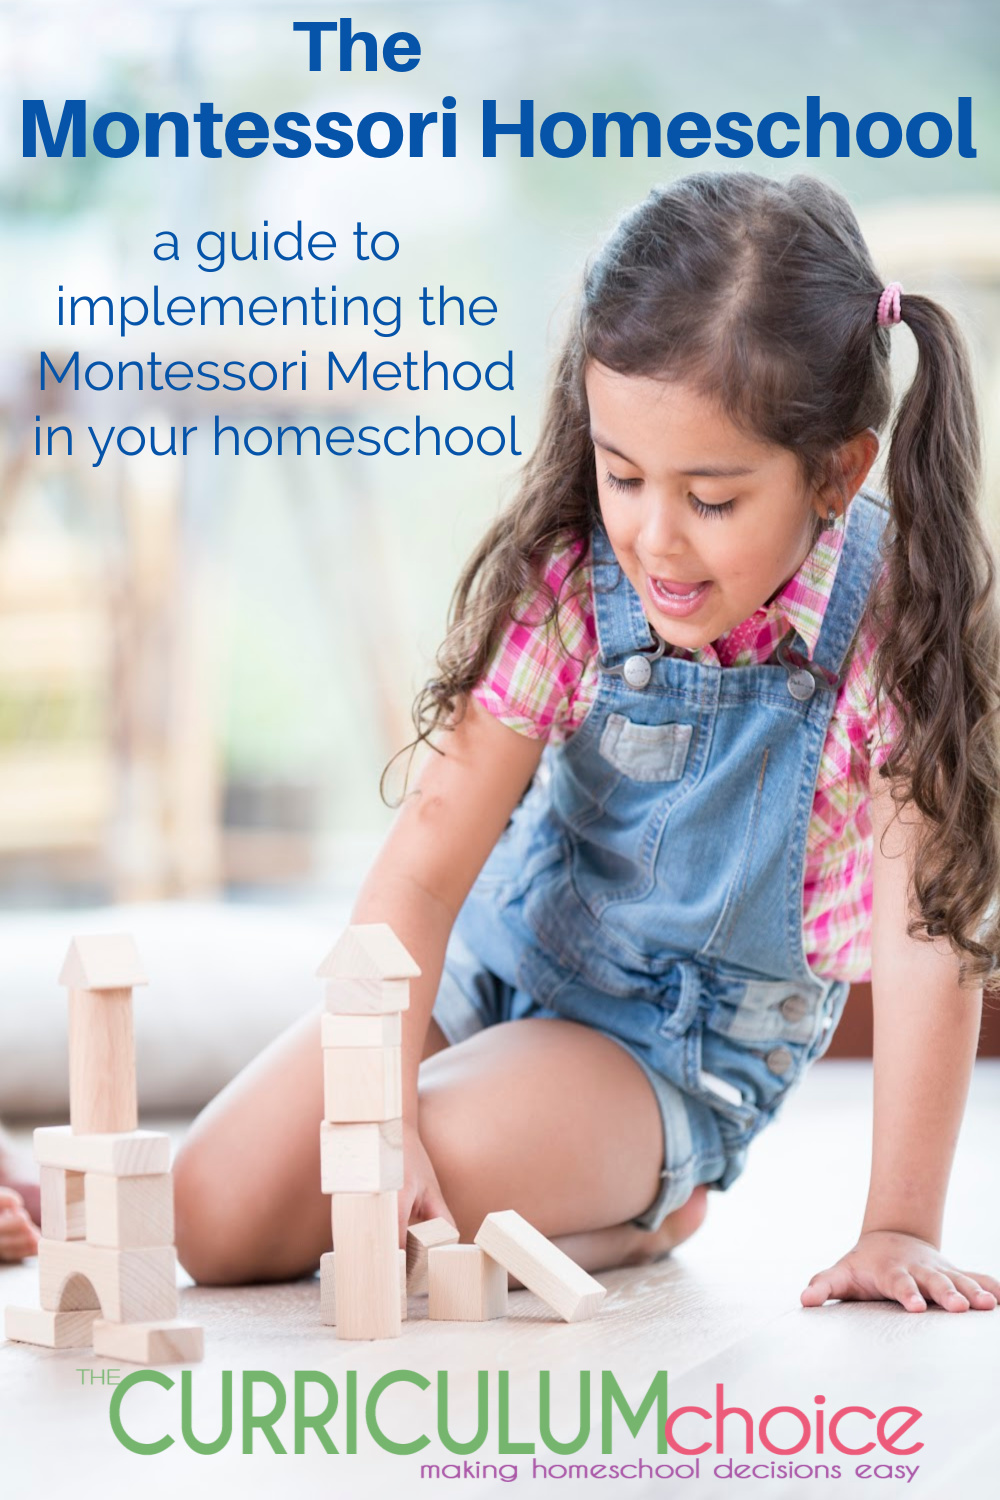 The Montessori Homeschool helps children learn problem-solving, patience, self-discipline, and practical life skills in a relaxed, parent guided environment. A guide from The Curriculum Choice